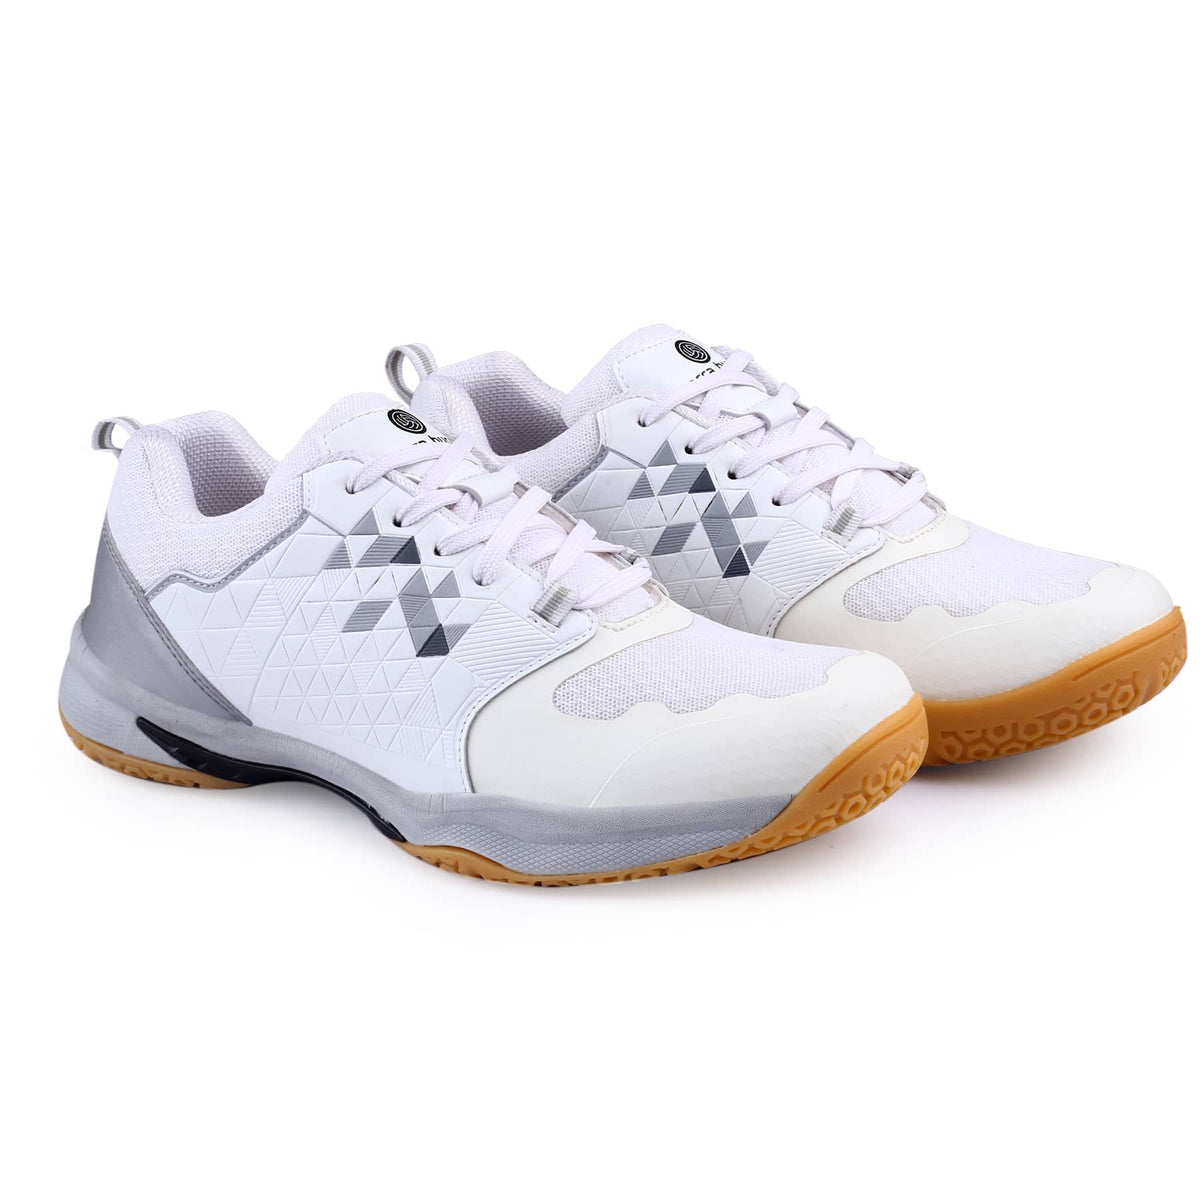 Bacca Bucci Pinnacle SwiftStrike - High-Performance Court Shoe with Non-Marking Outsole, Enhanced Cushioning for Badminton, Table Tennis, Volleyball, Squash and Tennis - Breathable Design, Superior Grip & Stability